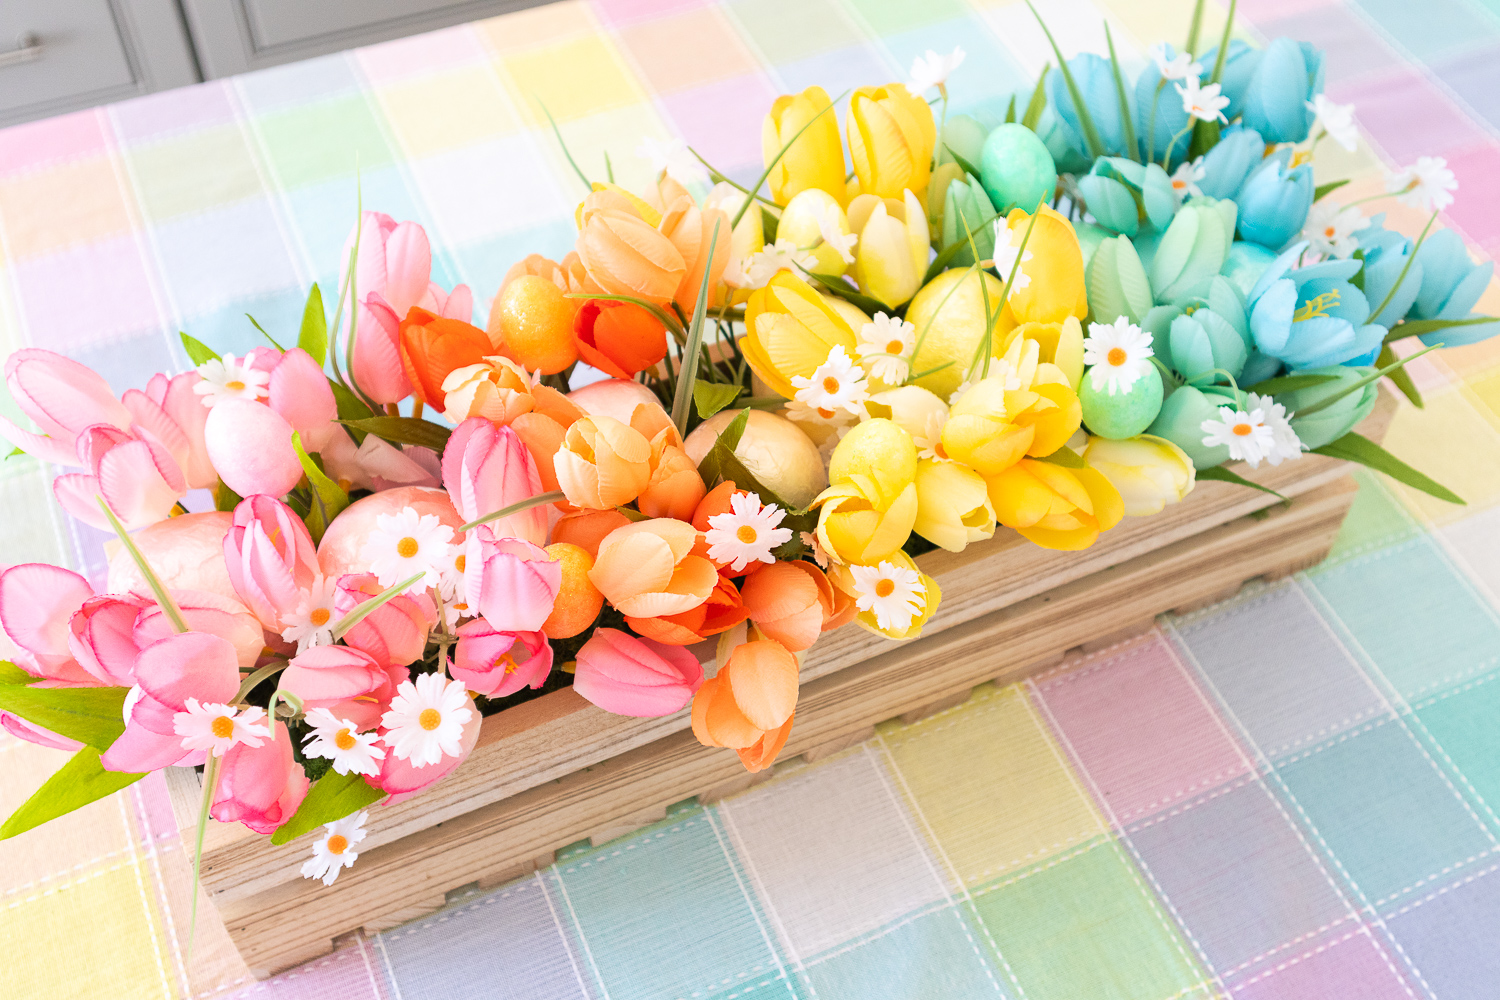 An overhead view of the pastel rainbow floral centerpiece. It's a wood crate filled with faux tulips and capiz eggs arranged in rainbow order. There are small white daisies and mini glitter foam eggs peeking out of the arrangement.